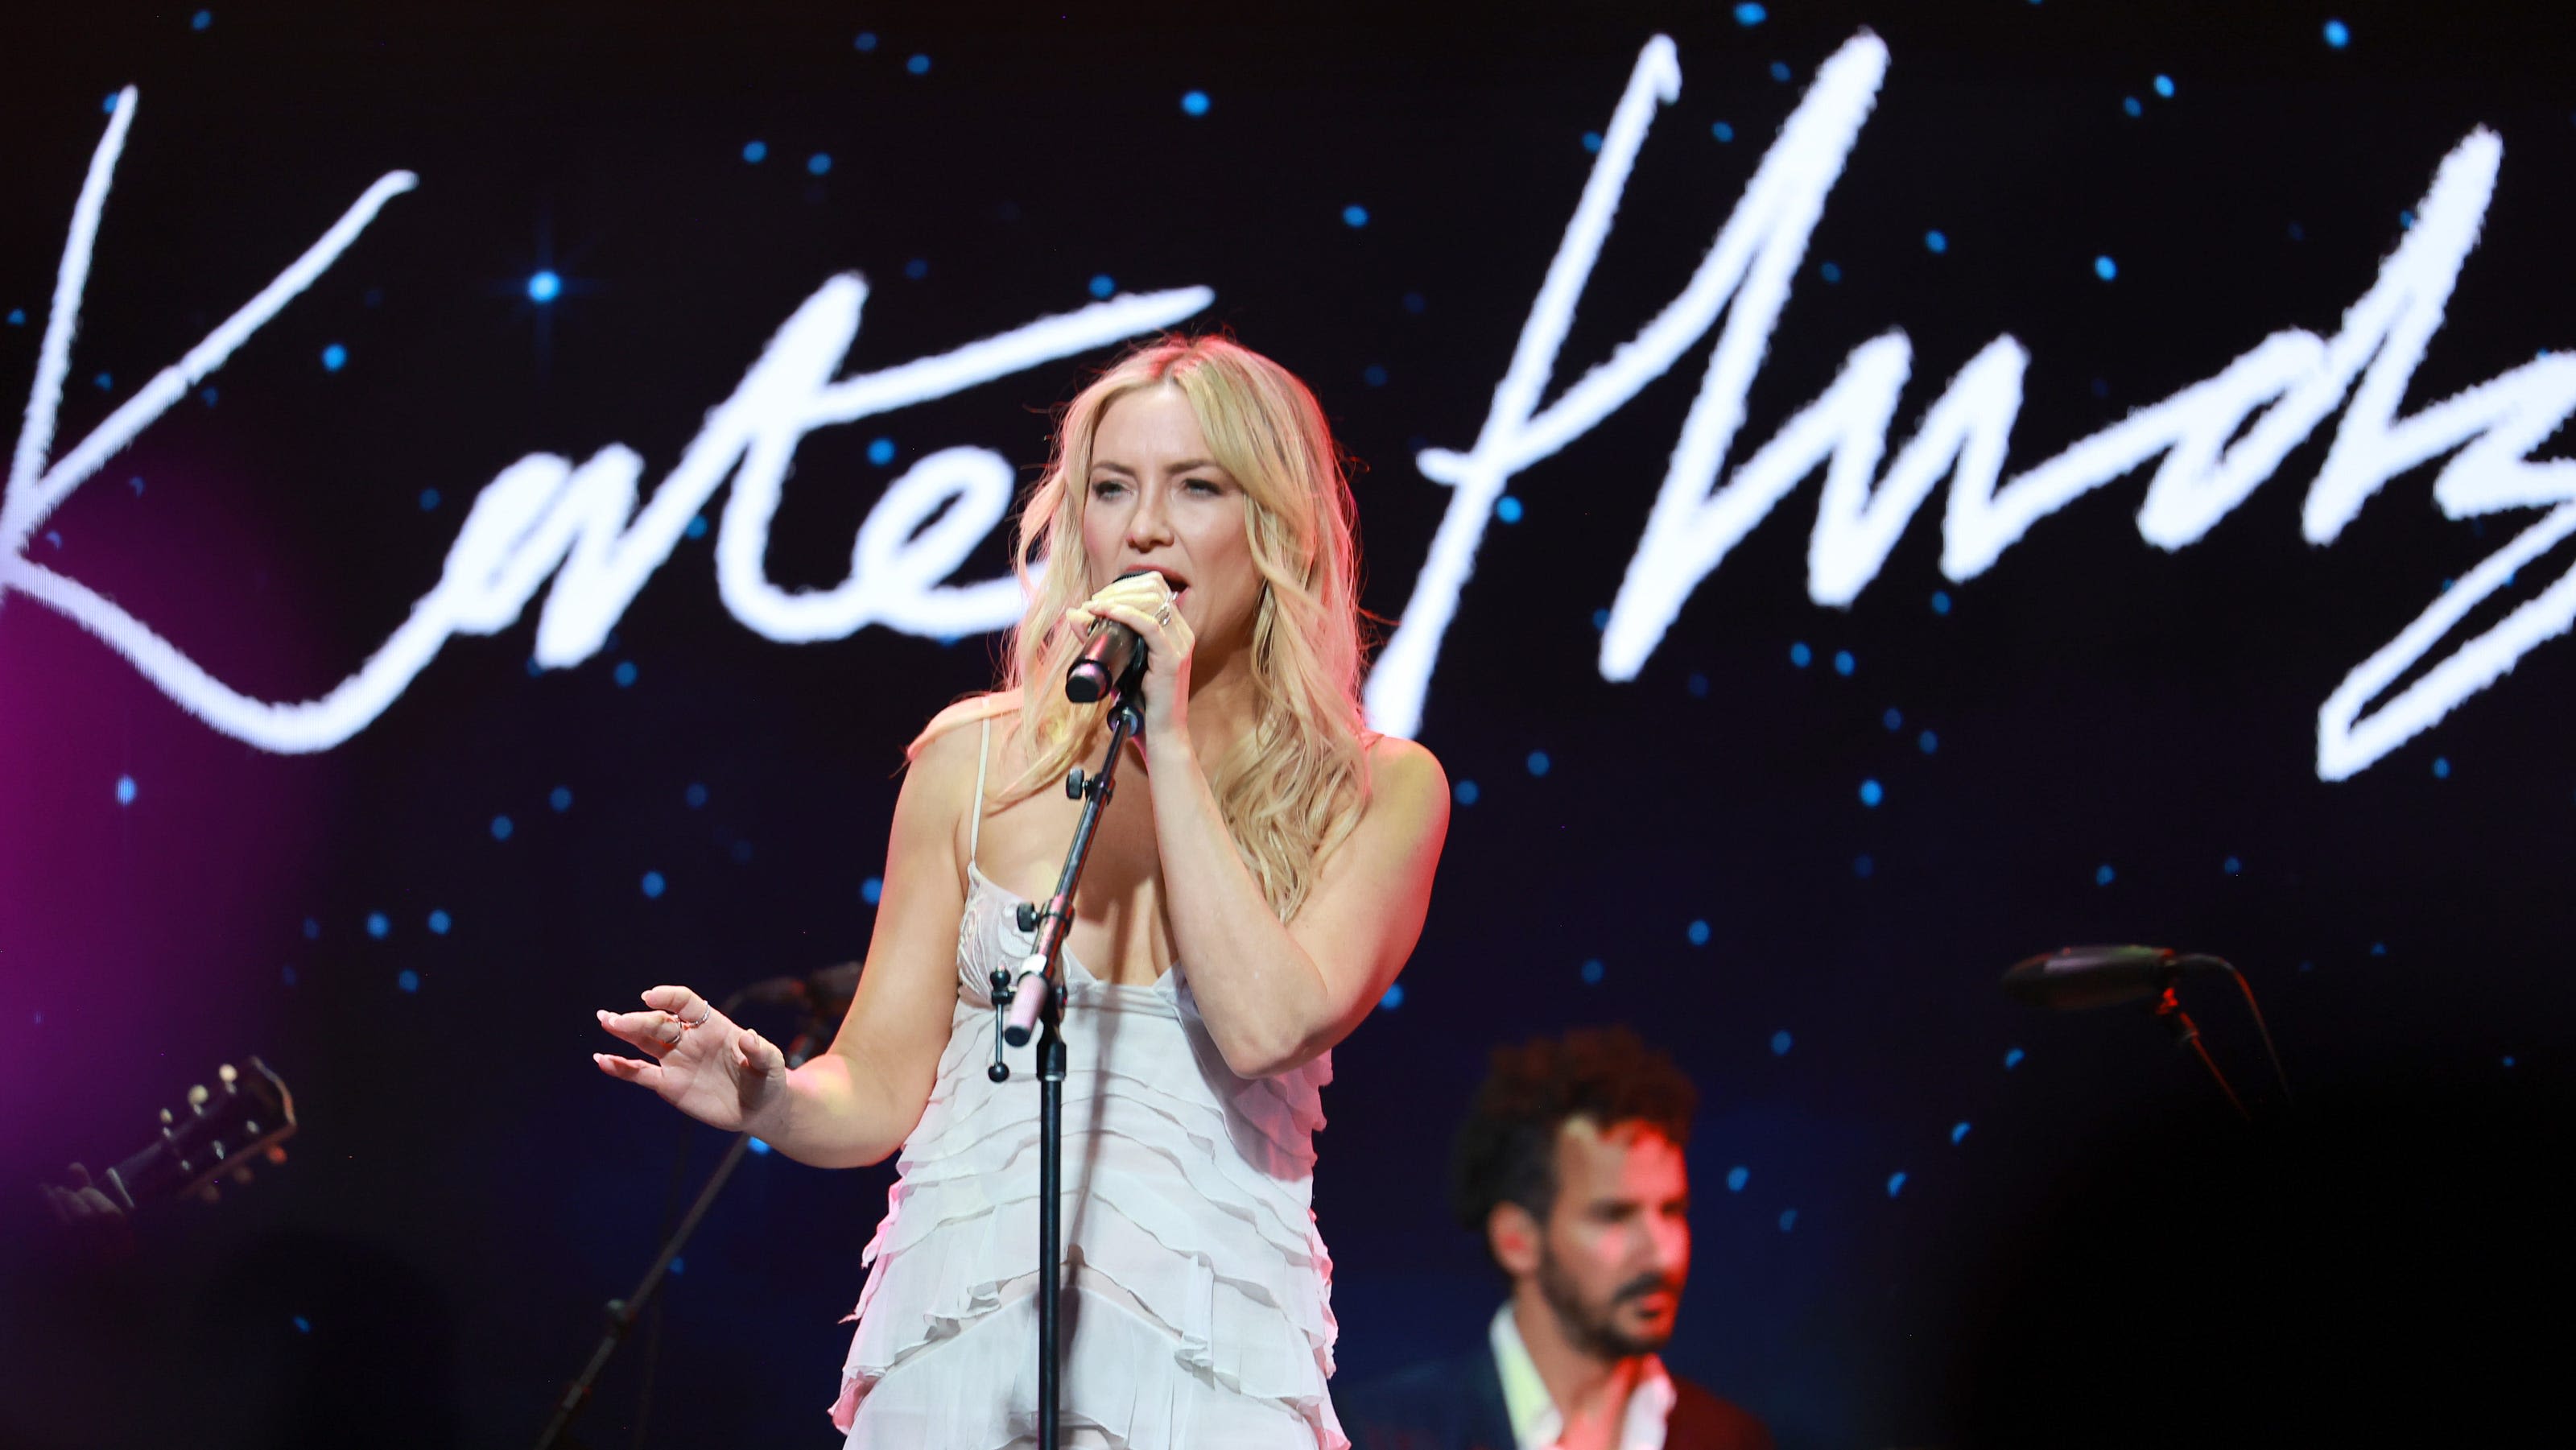 Kate Hudson makes debut TV performance on 'Tonight Show,' explains foray into music: Watch